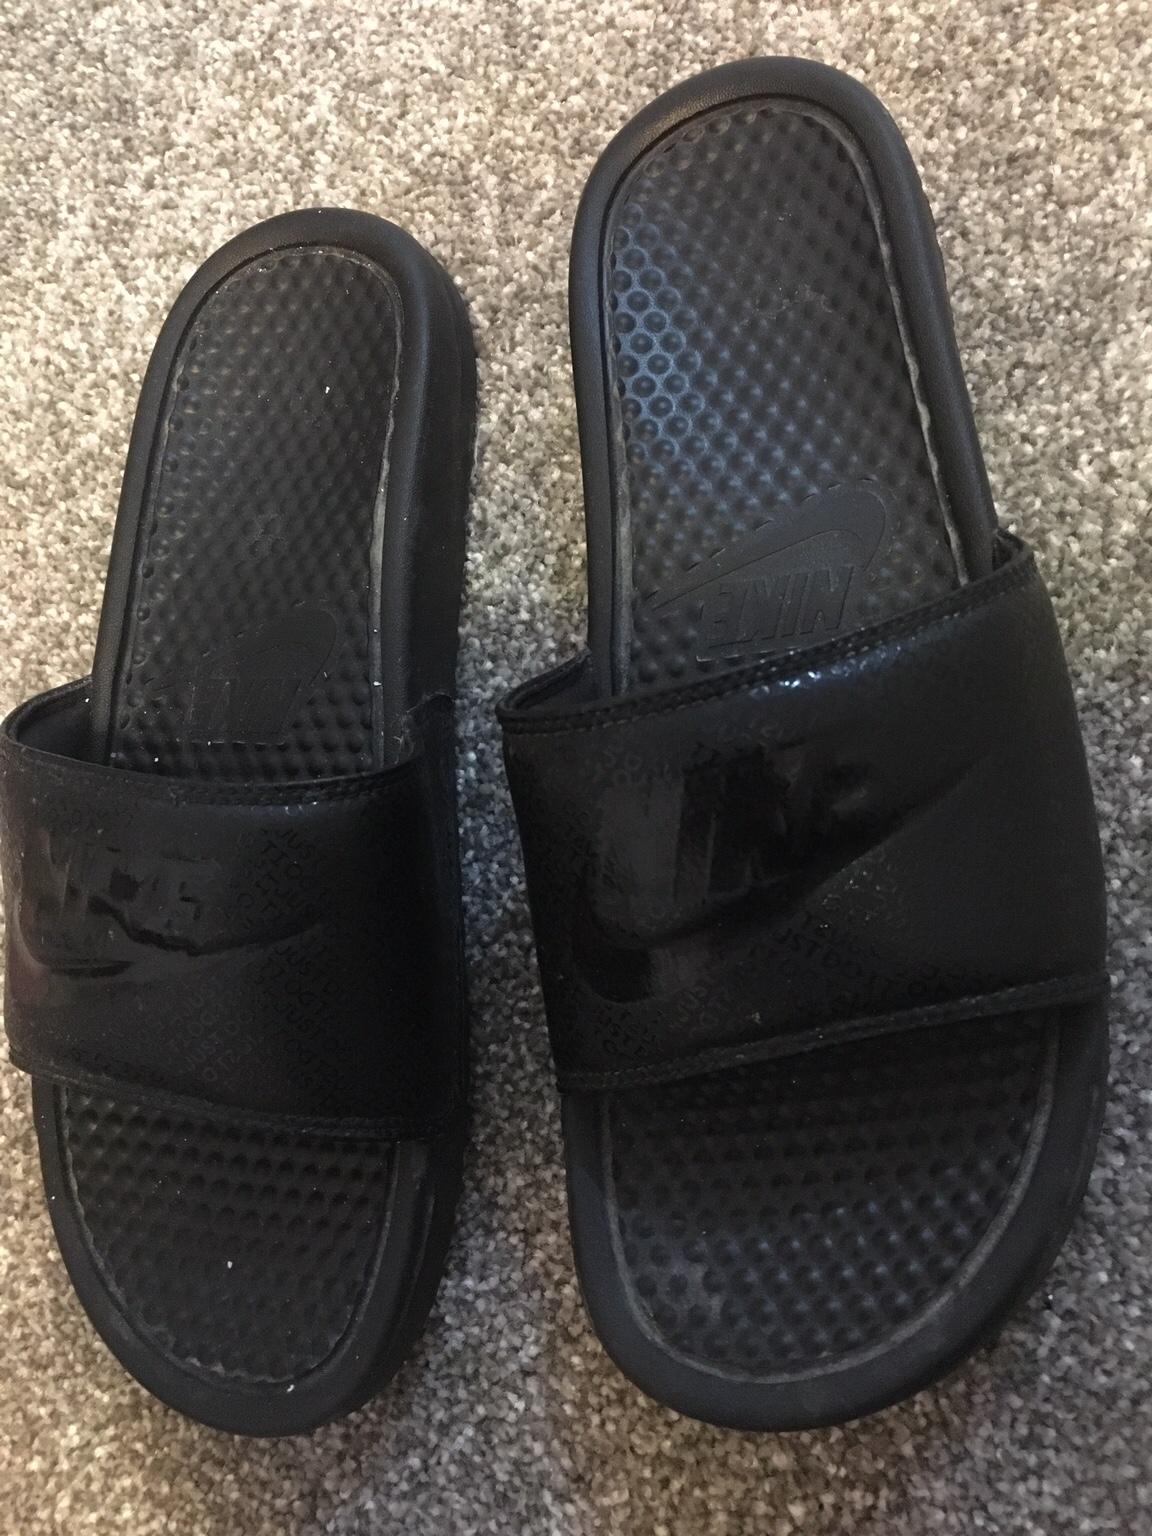 Men’s size 9 Nike sliders in South Staffordshire for £7.00 for sale ...